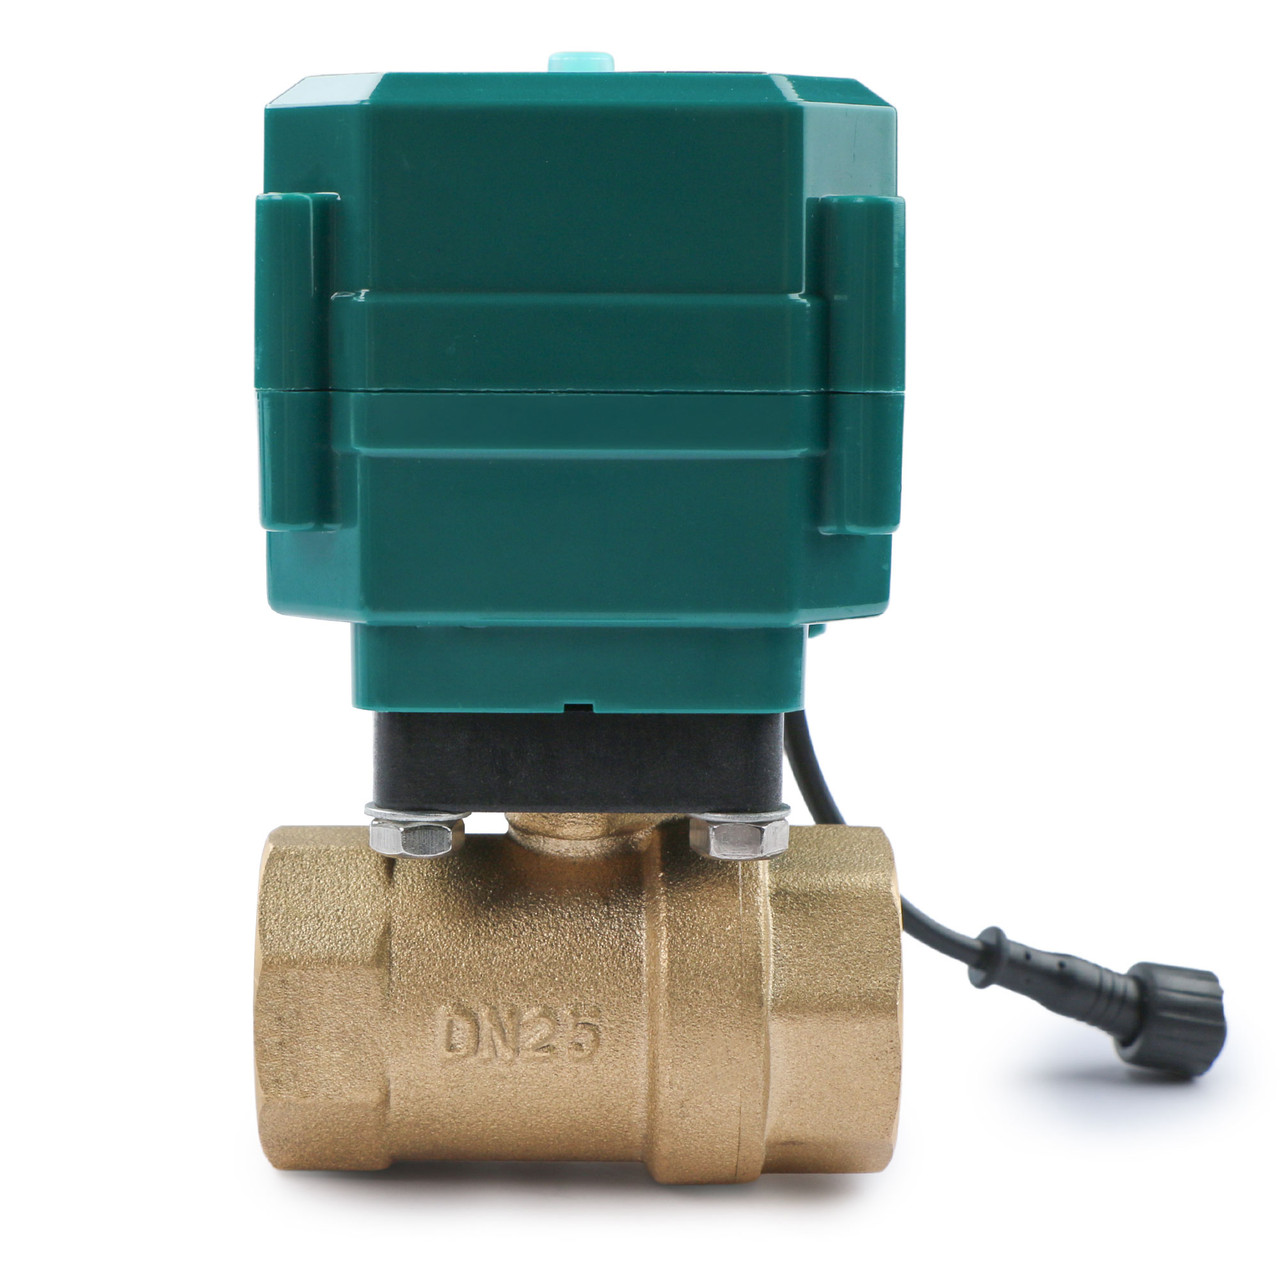 1 Smart Motorized Ball Valve – Remote Control Electrical Ball Valve with  Manual Switch, 5V DC USB - U.S. Solid